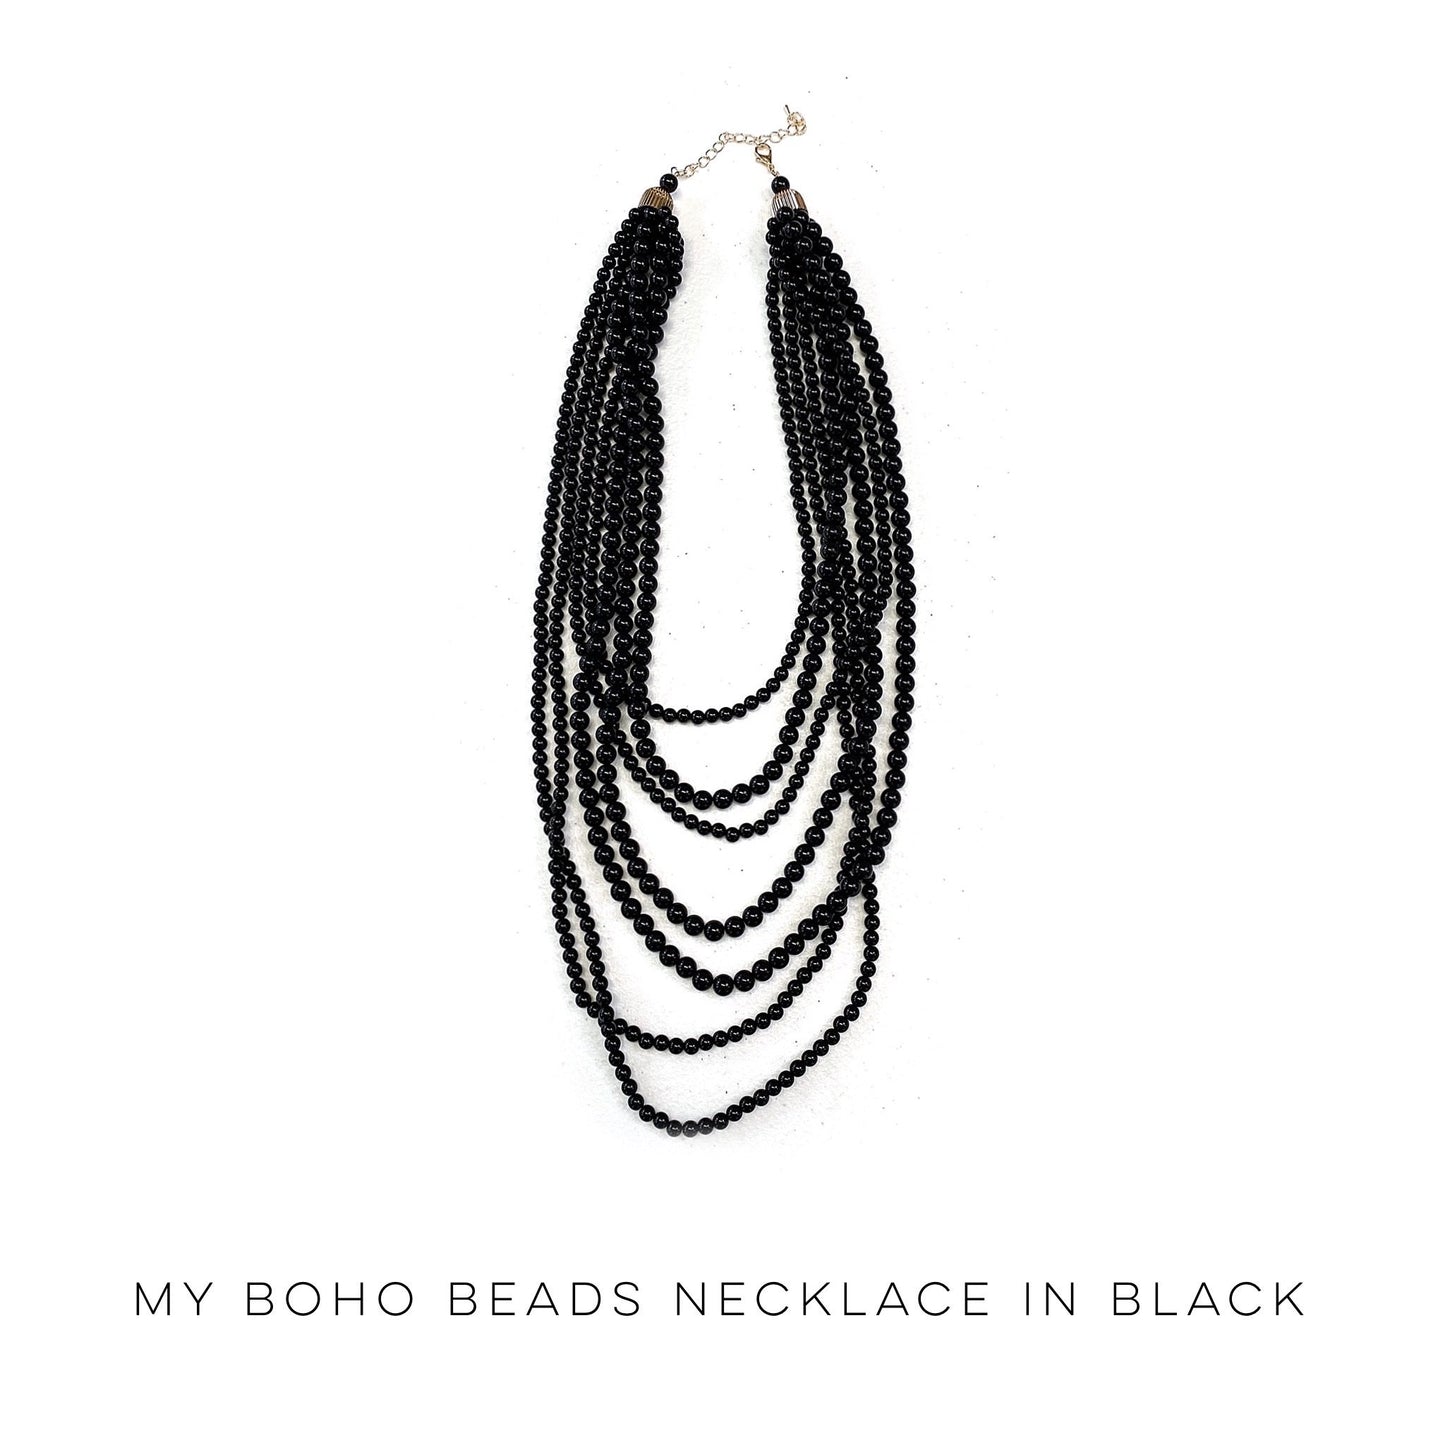 My Boho Beads Necklace in Black!